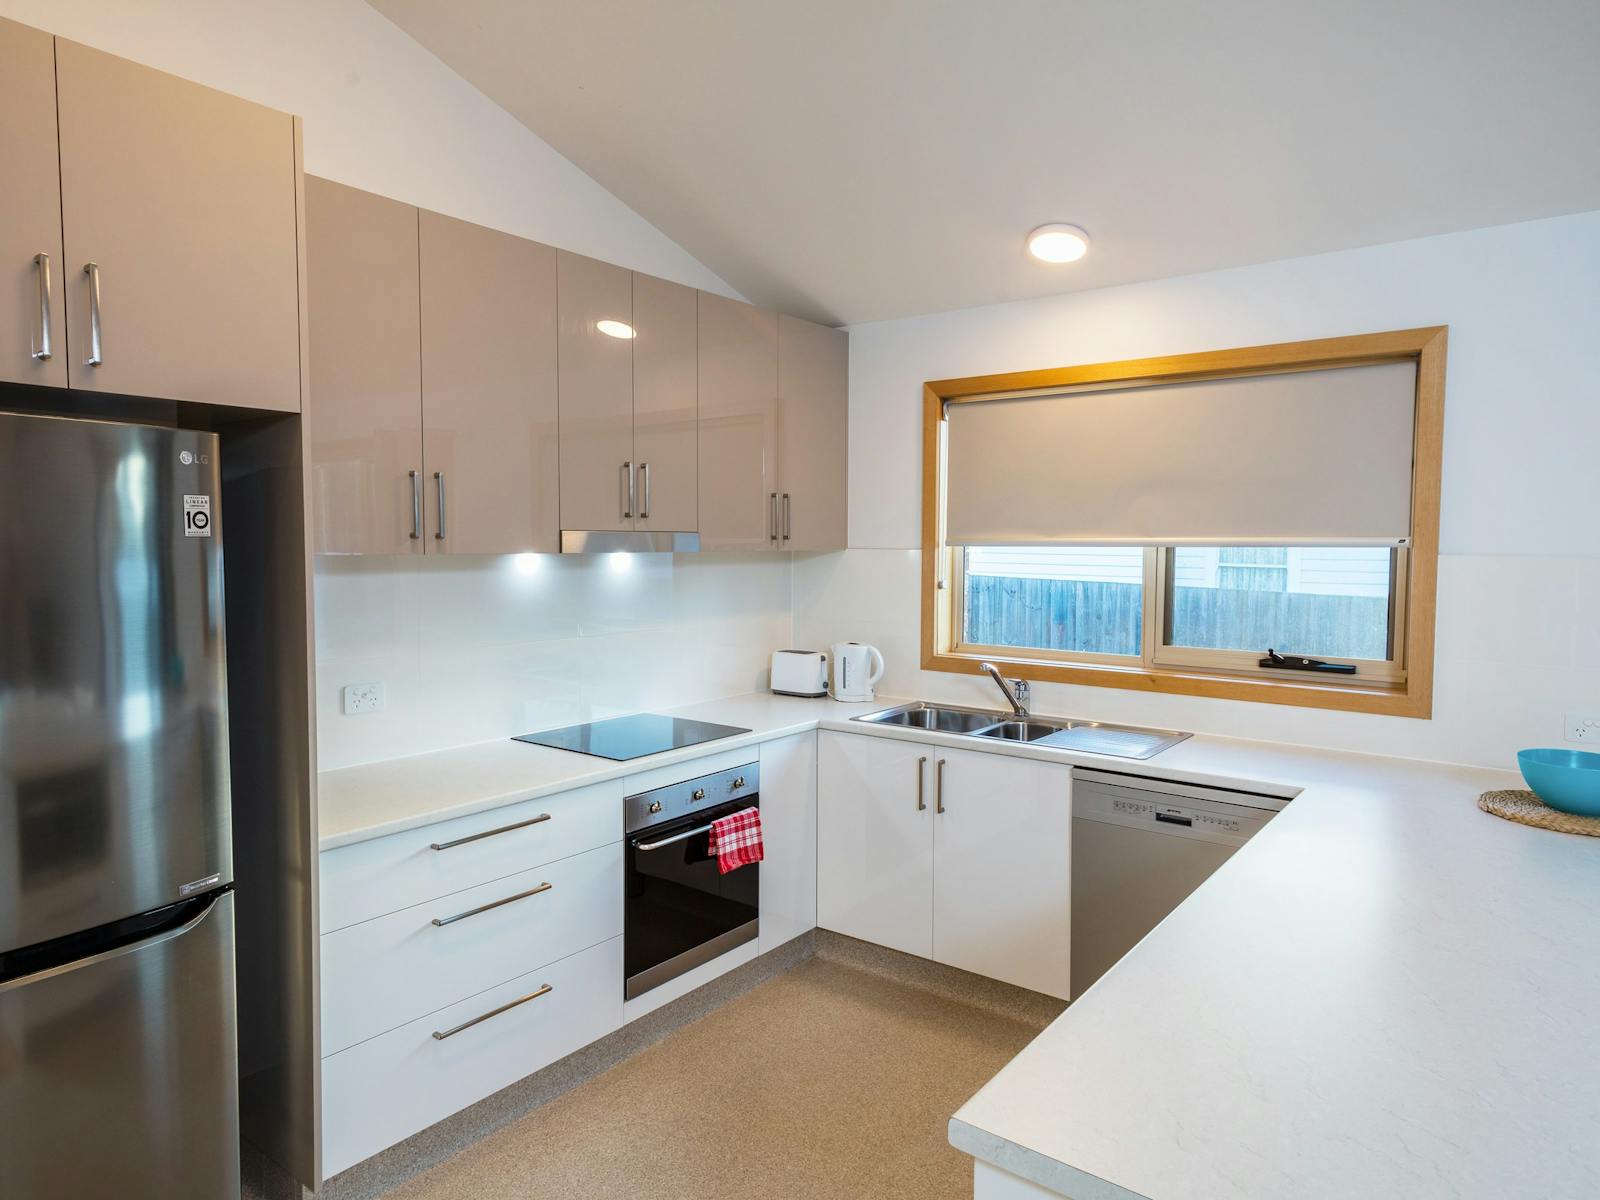 The kitchen has a fridge and freezer, glass-top hob, oven, dishwasher and double sink.